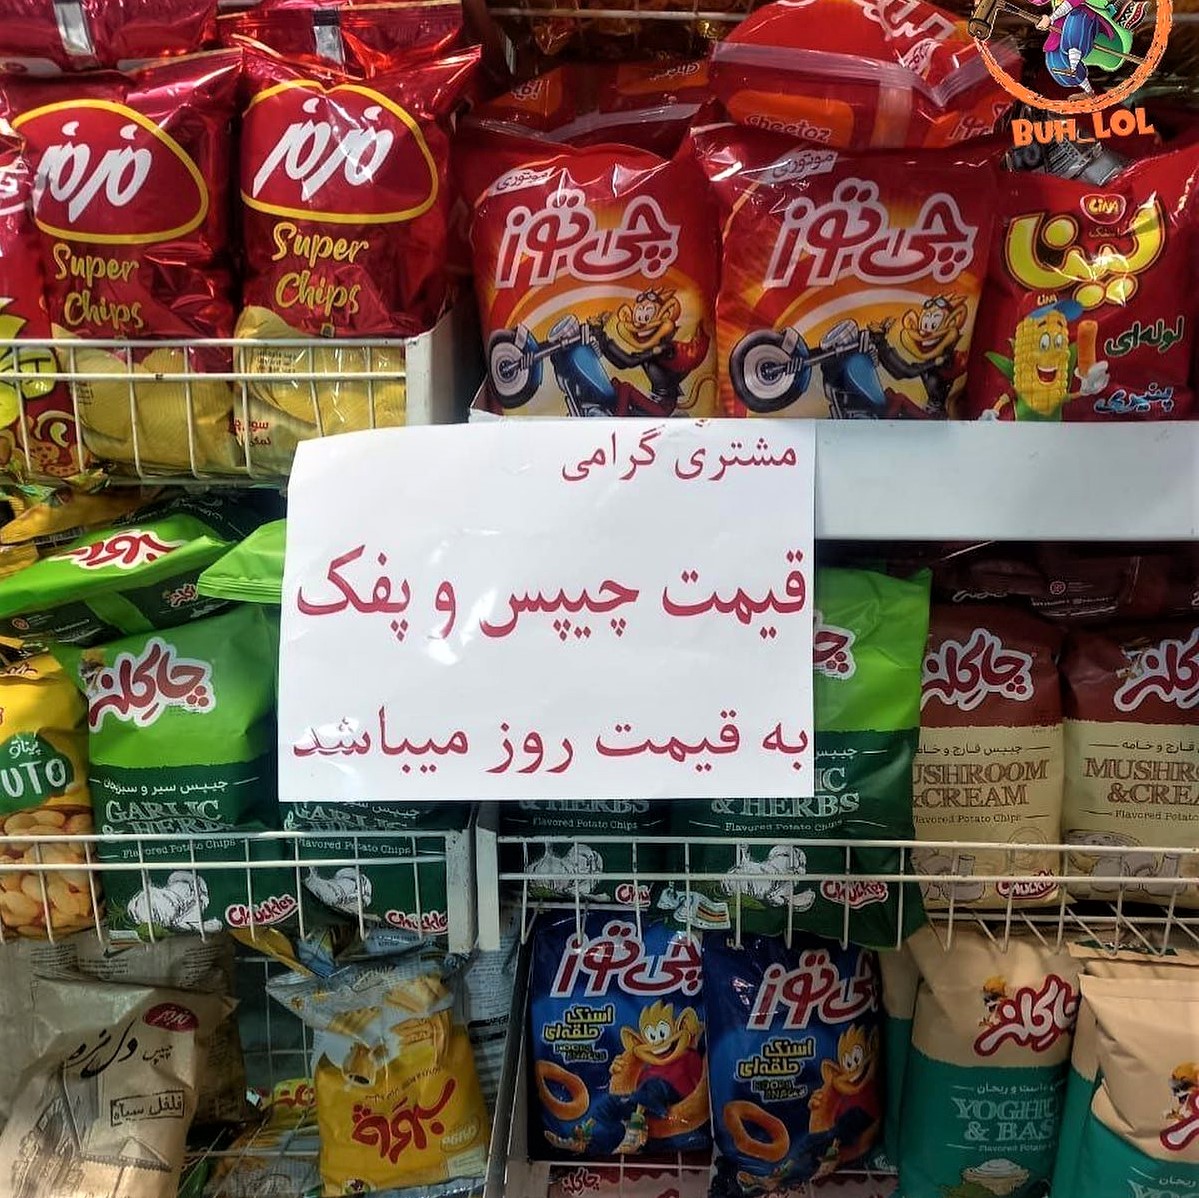 Because of runaway inflation, some Iranian merchants no longer post prices